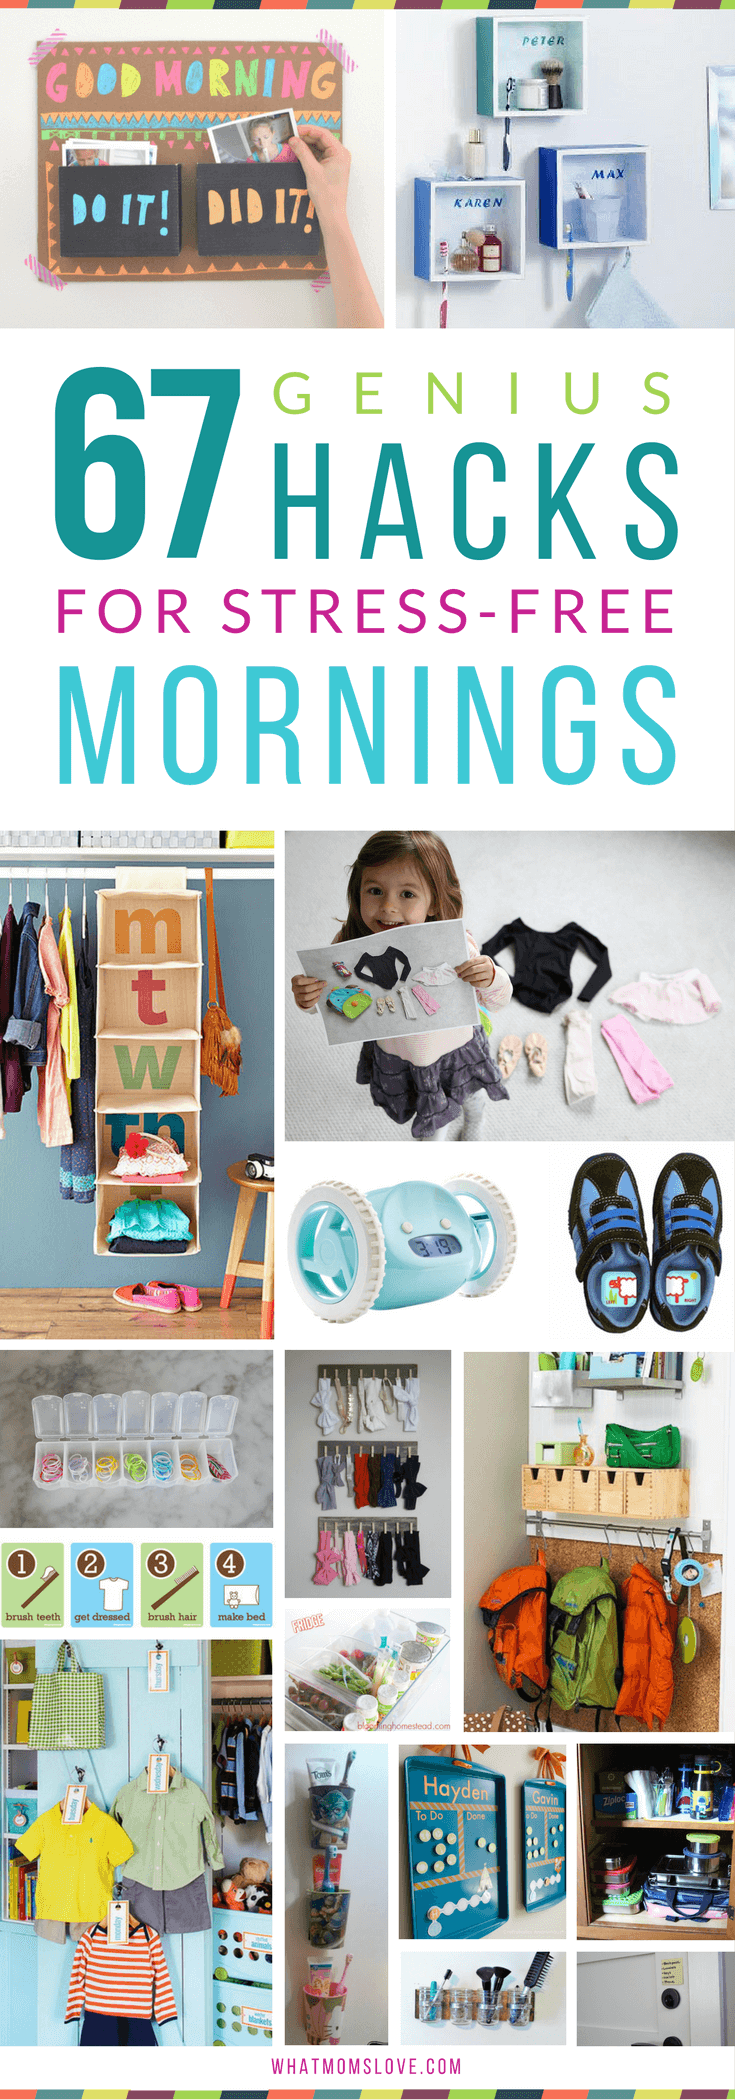 Hacks, Tips and Tricks for Stress-Free Mornings with Kids | Organization ideas for back-to-school. including morning routine checklists, clothes organization, command centers and backpack nooks, bathroom hacks, and more! Get all the inspiration at whatmomslove.com